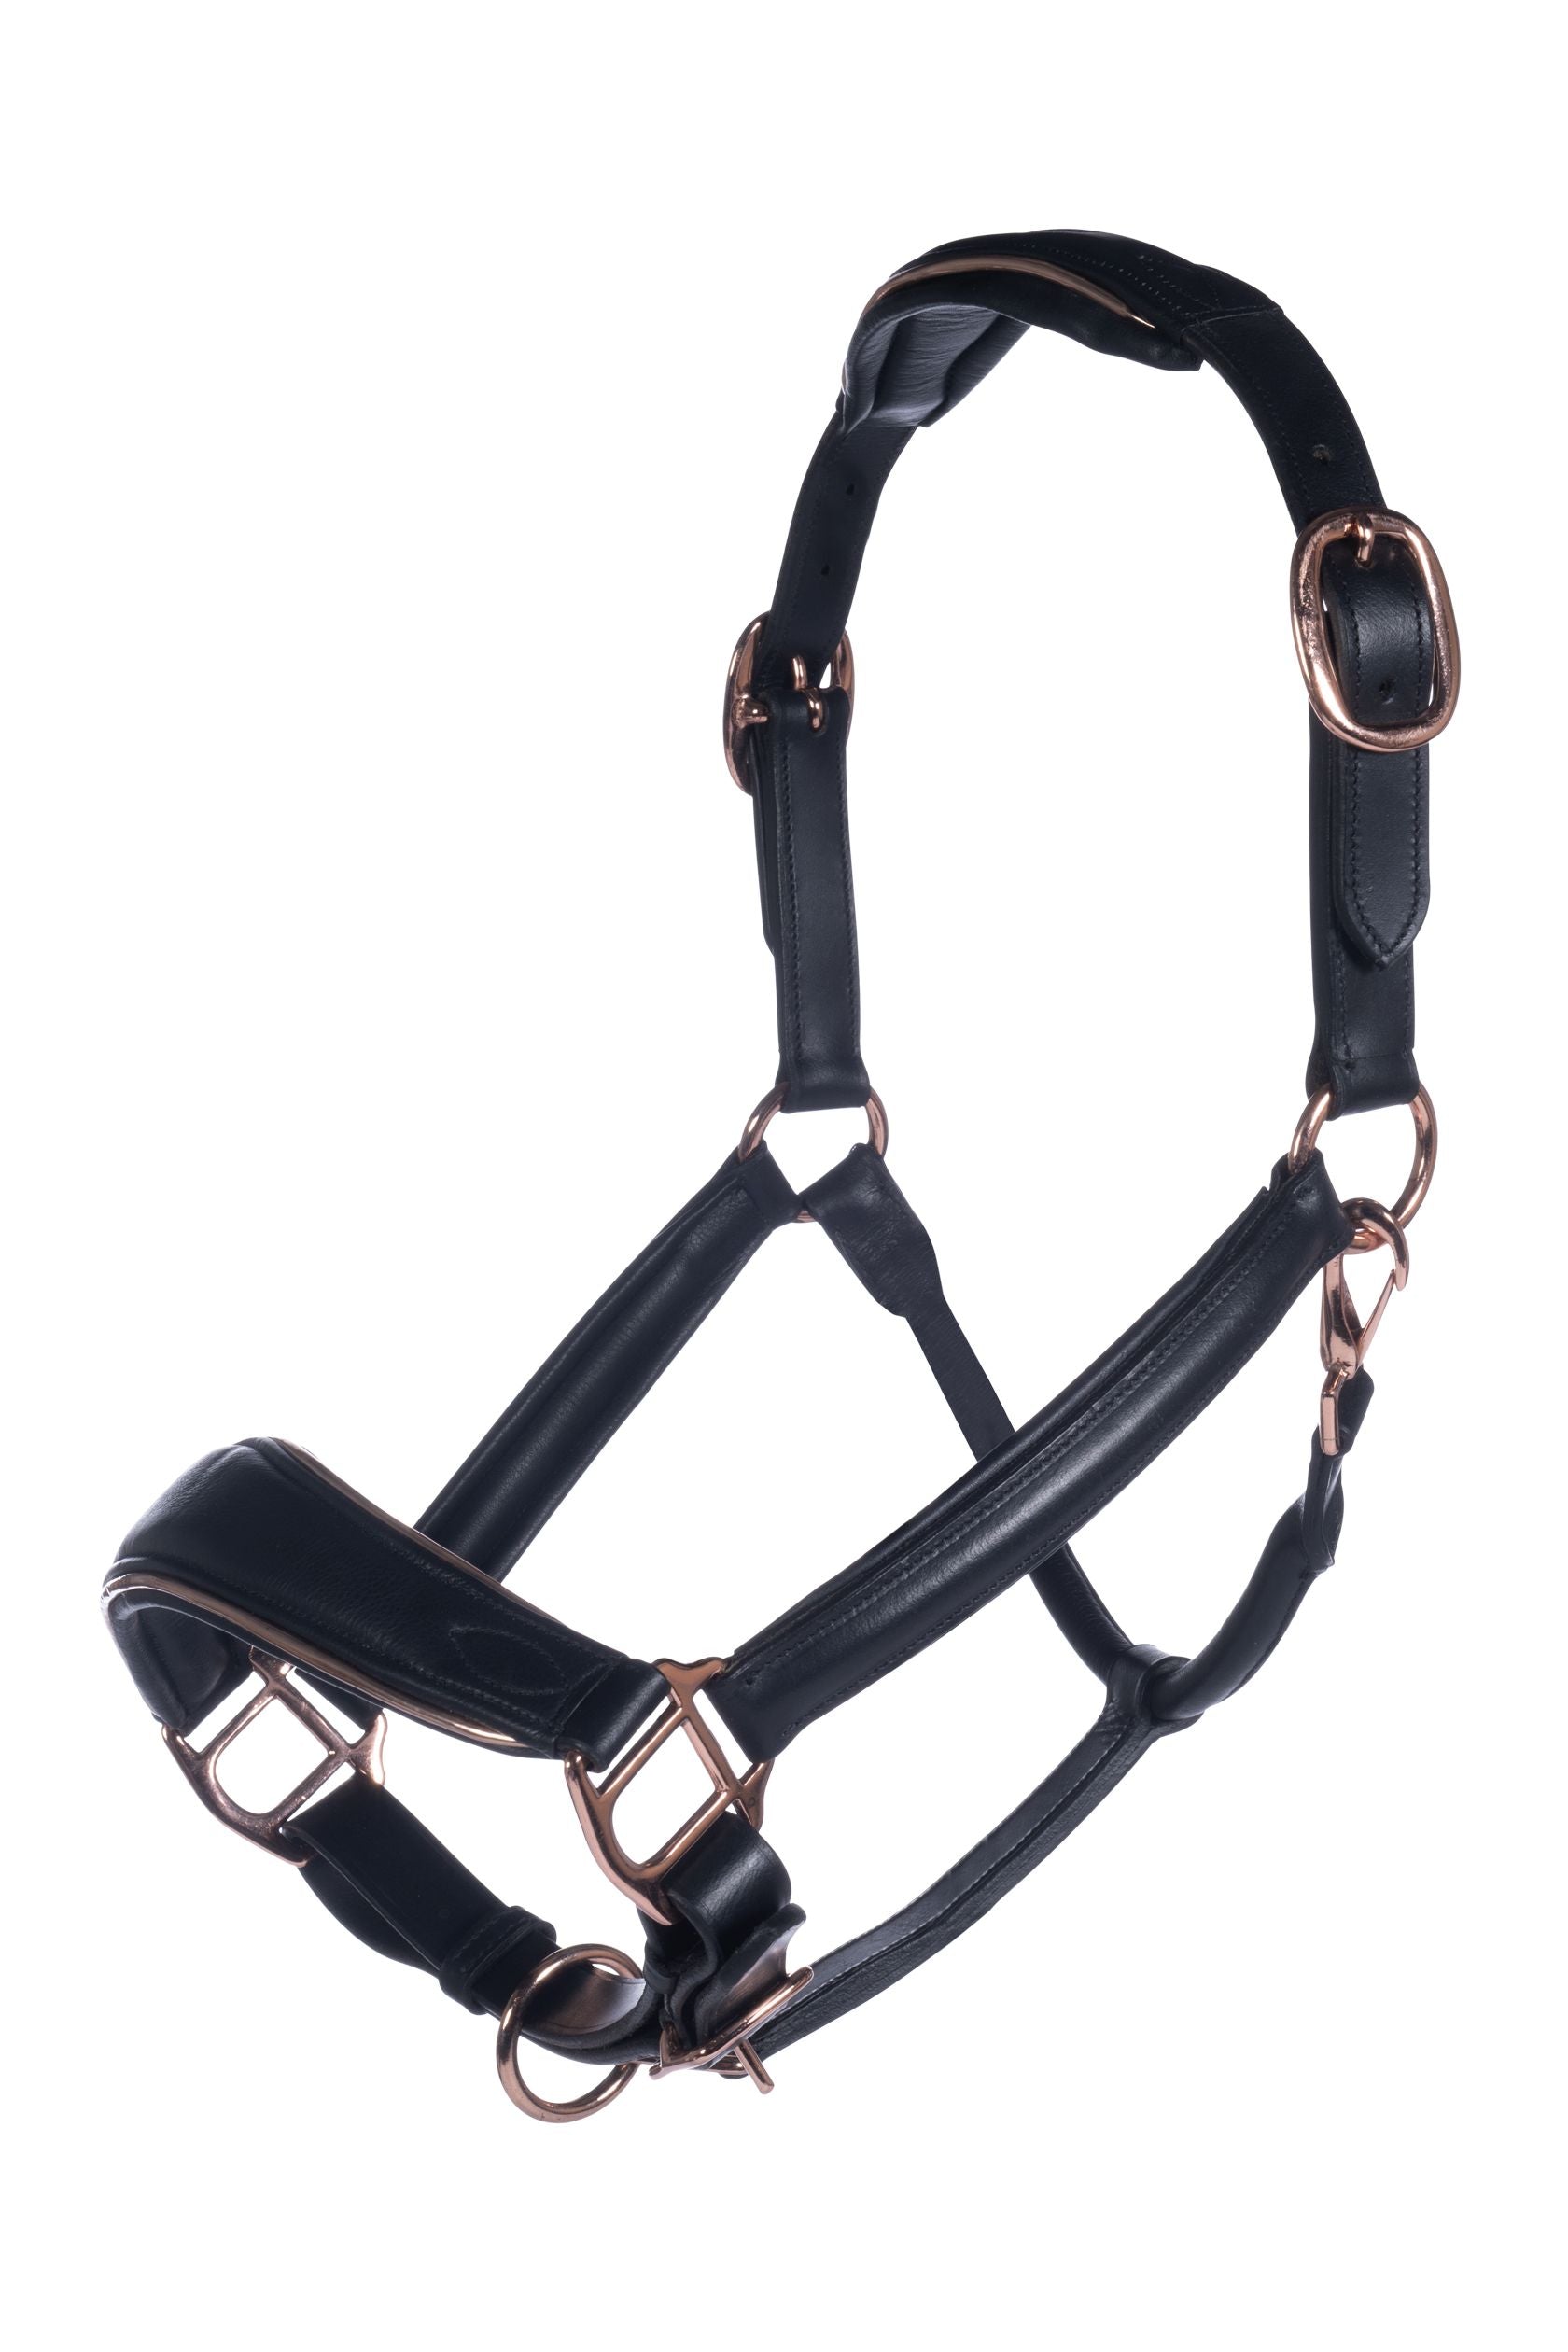 Rosegold Leather Halter - The Dressage Pony Store